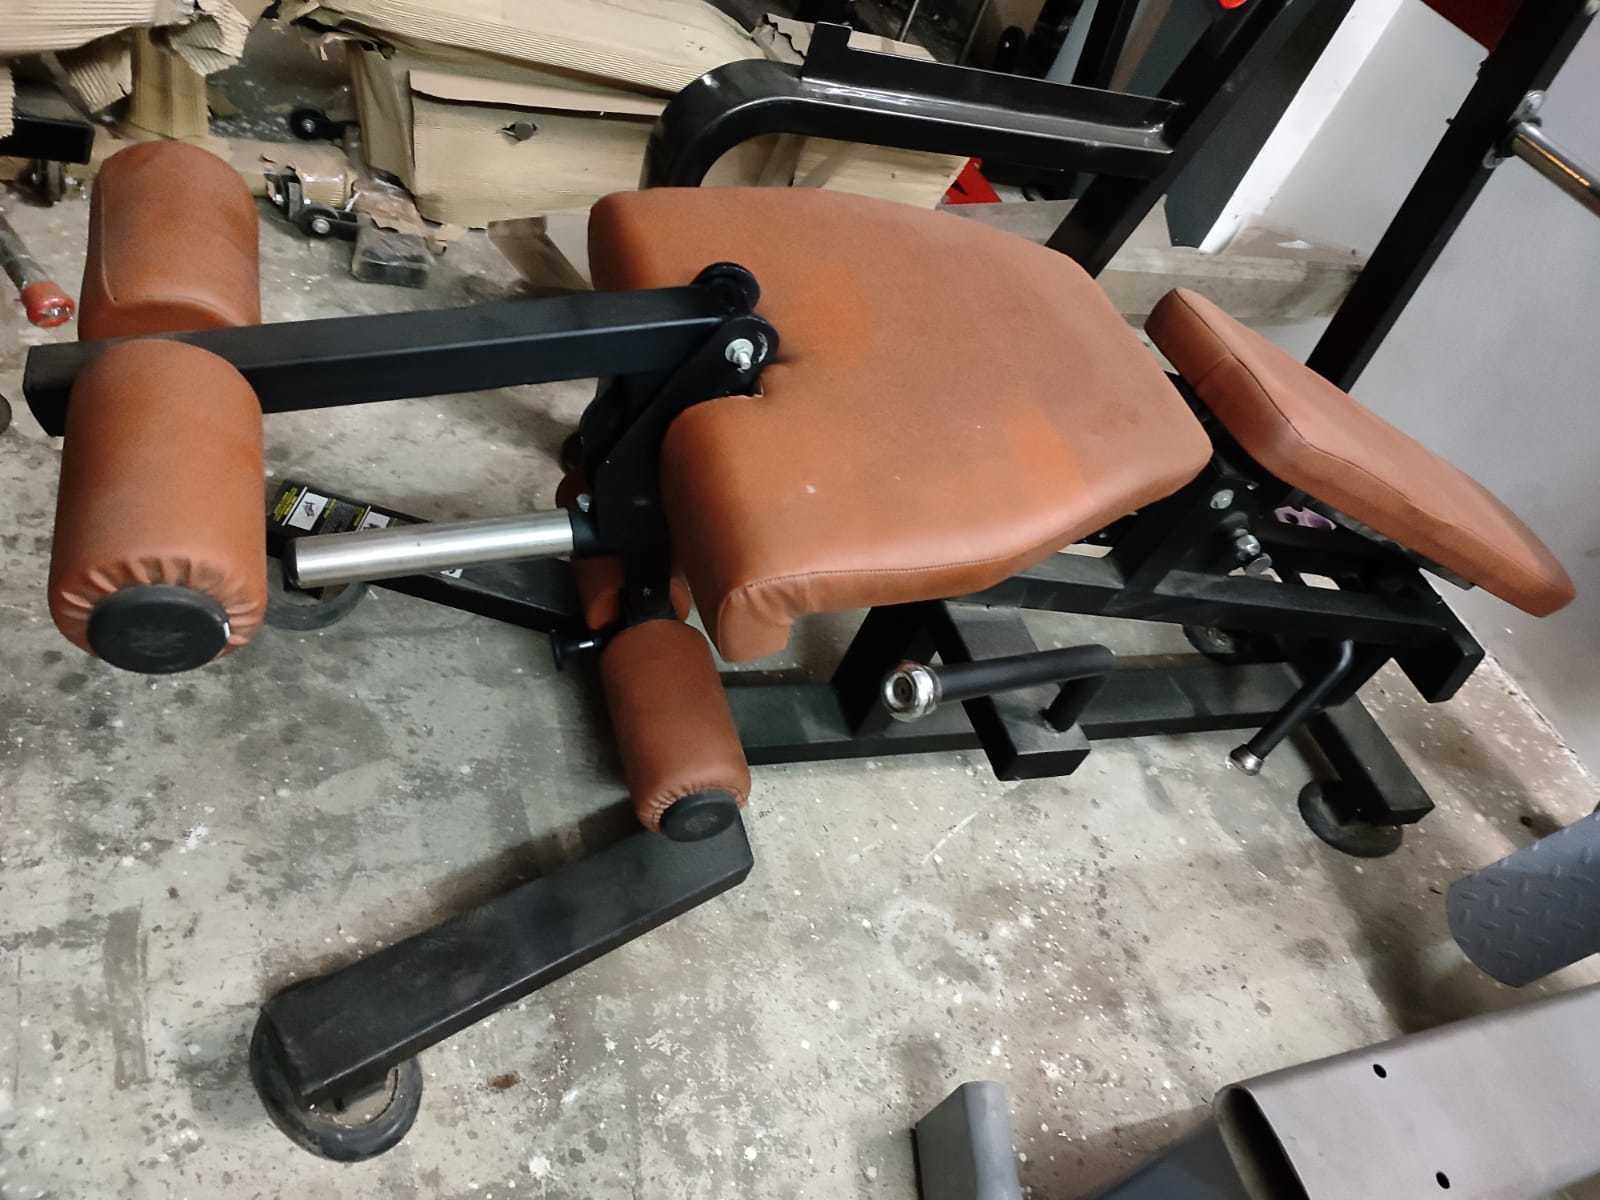 Plate Loaded Leg Curl and Leg Extension Machine